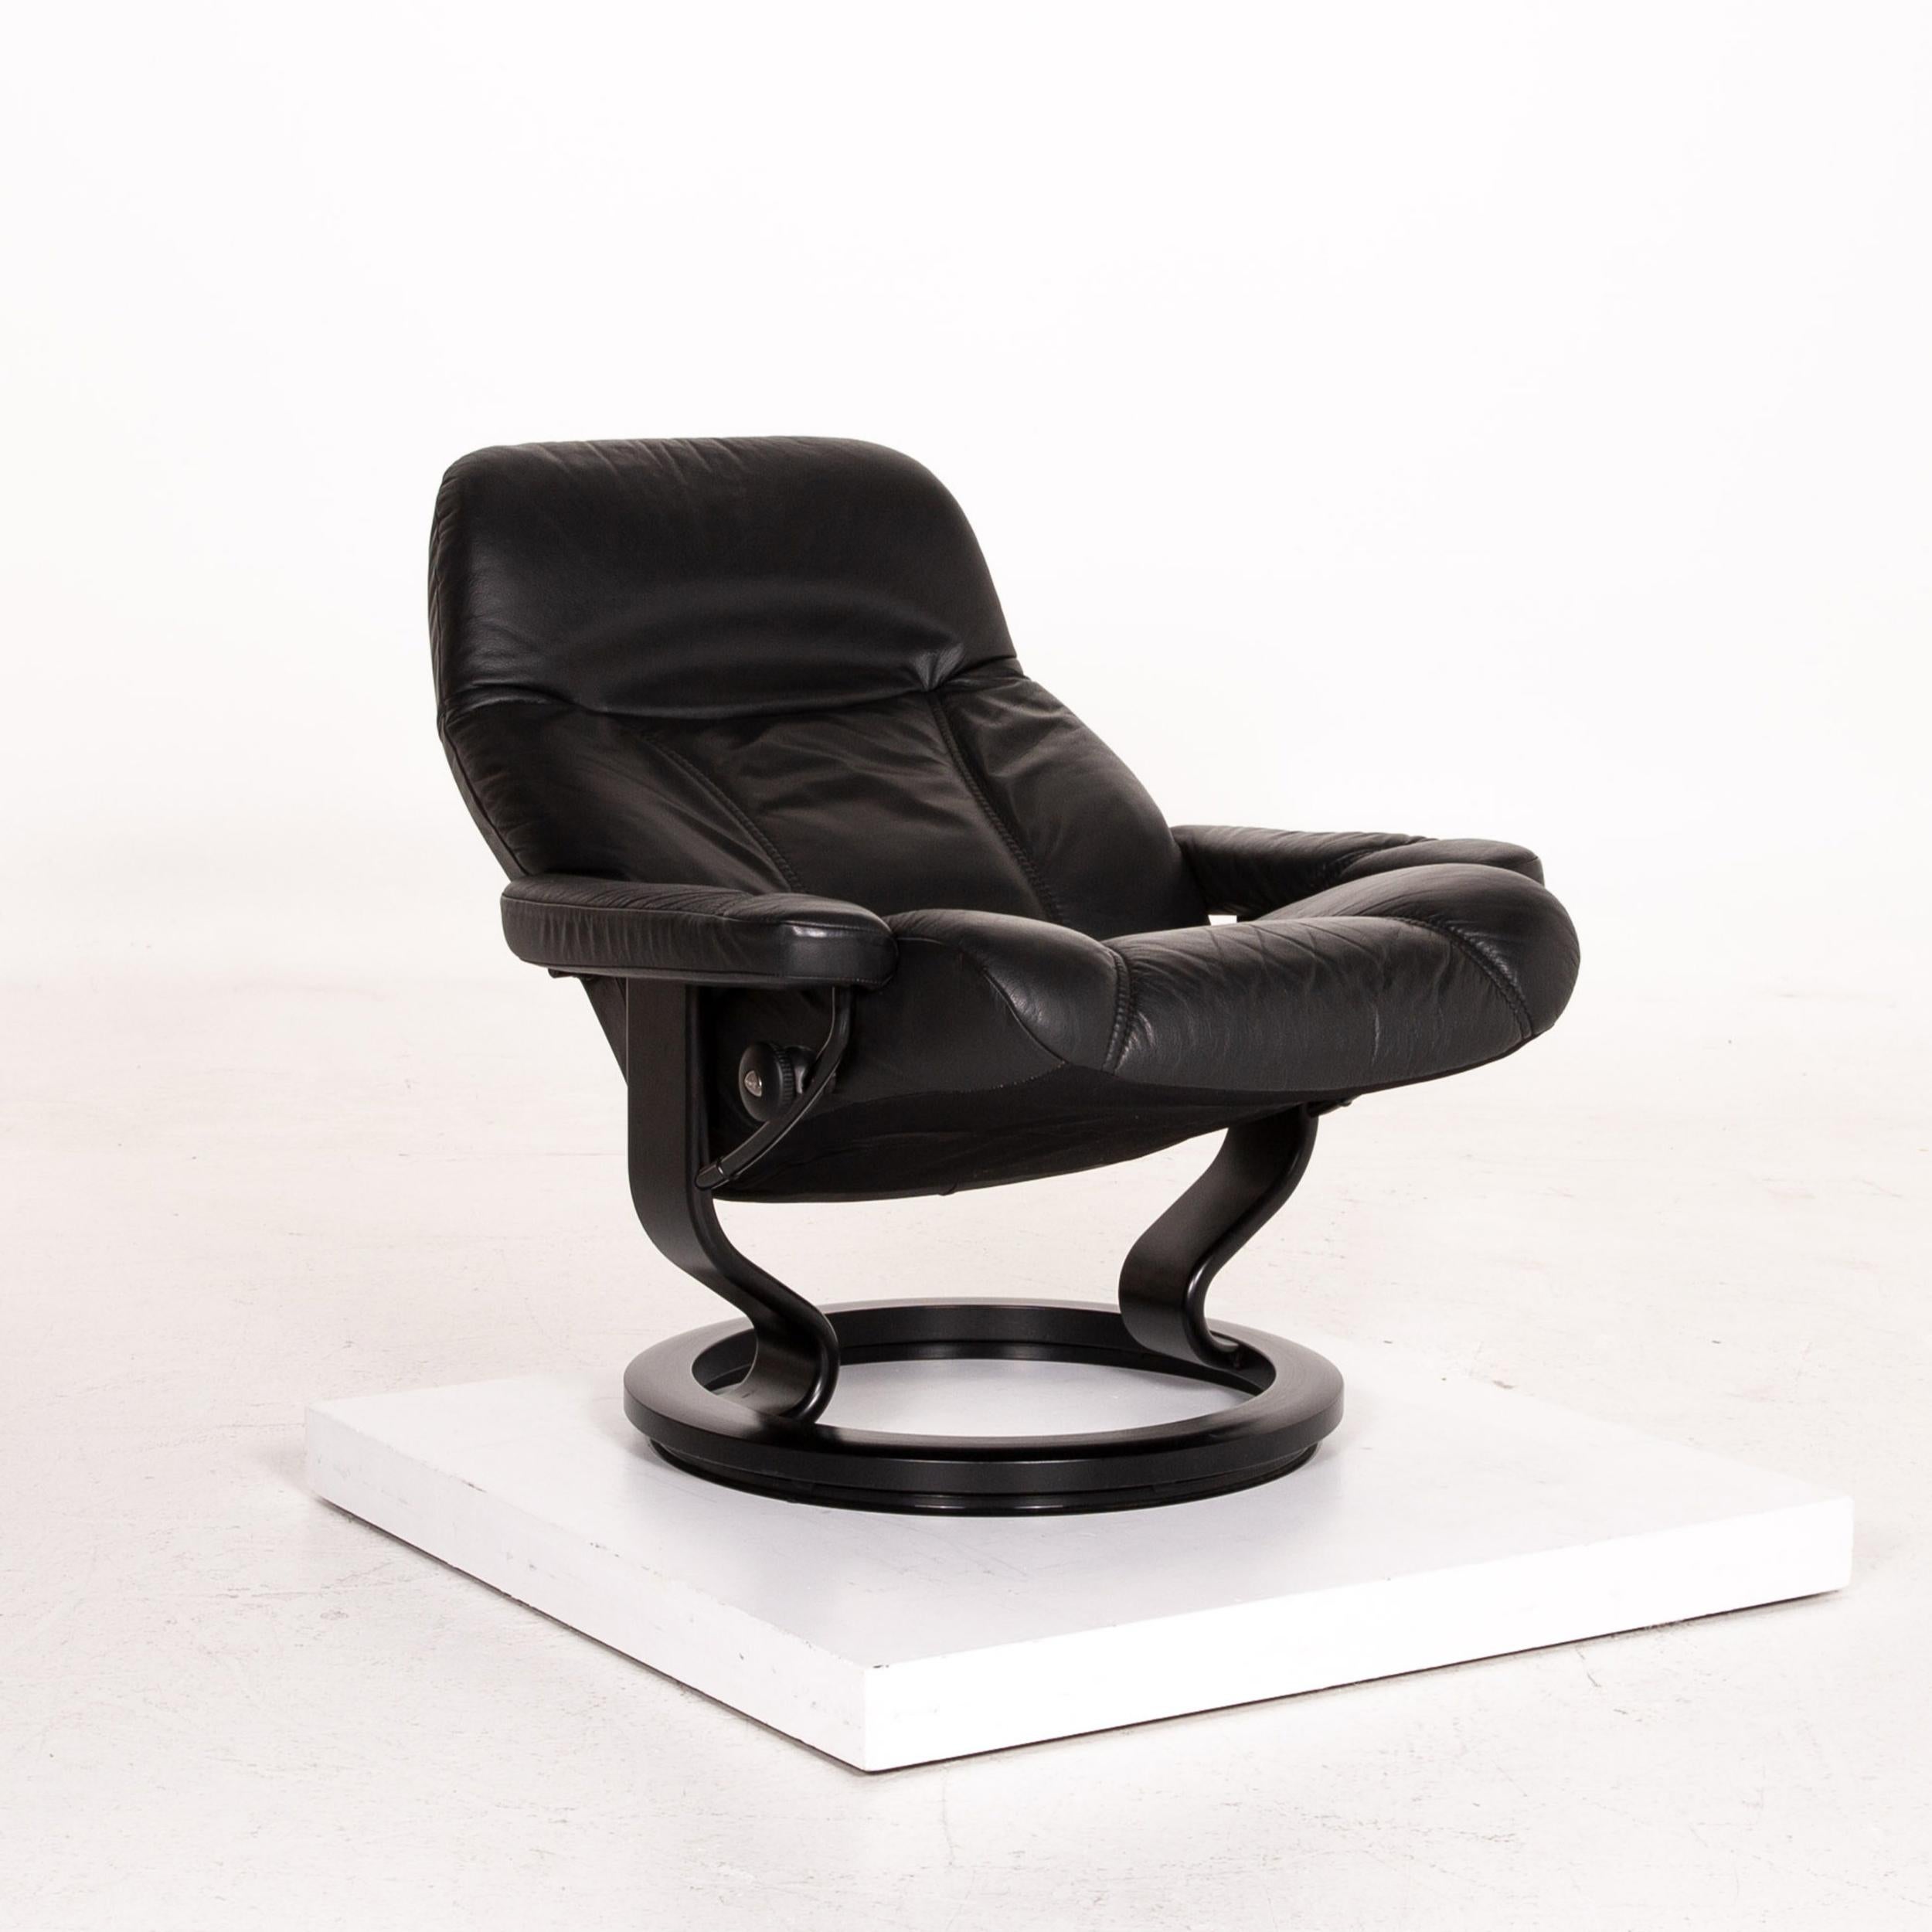 Modern Stressless Consul Leather Armchair Incl. Stool Black Relaxation Function